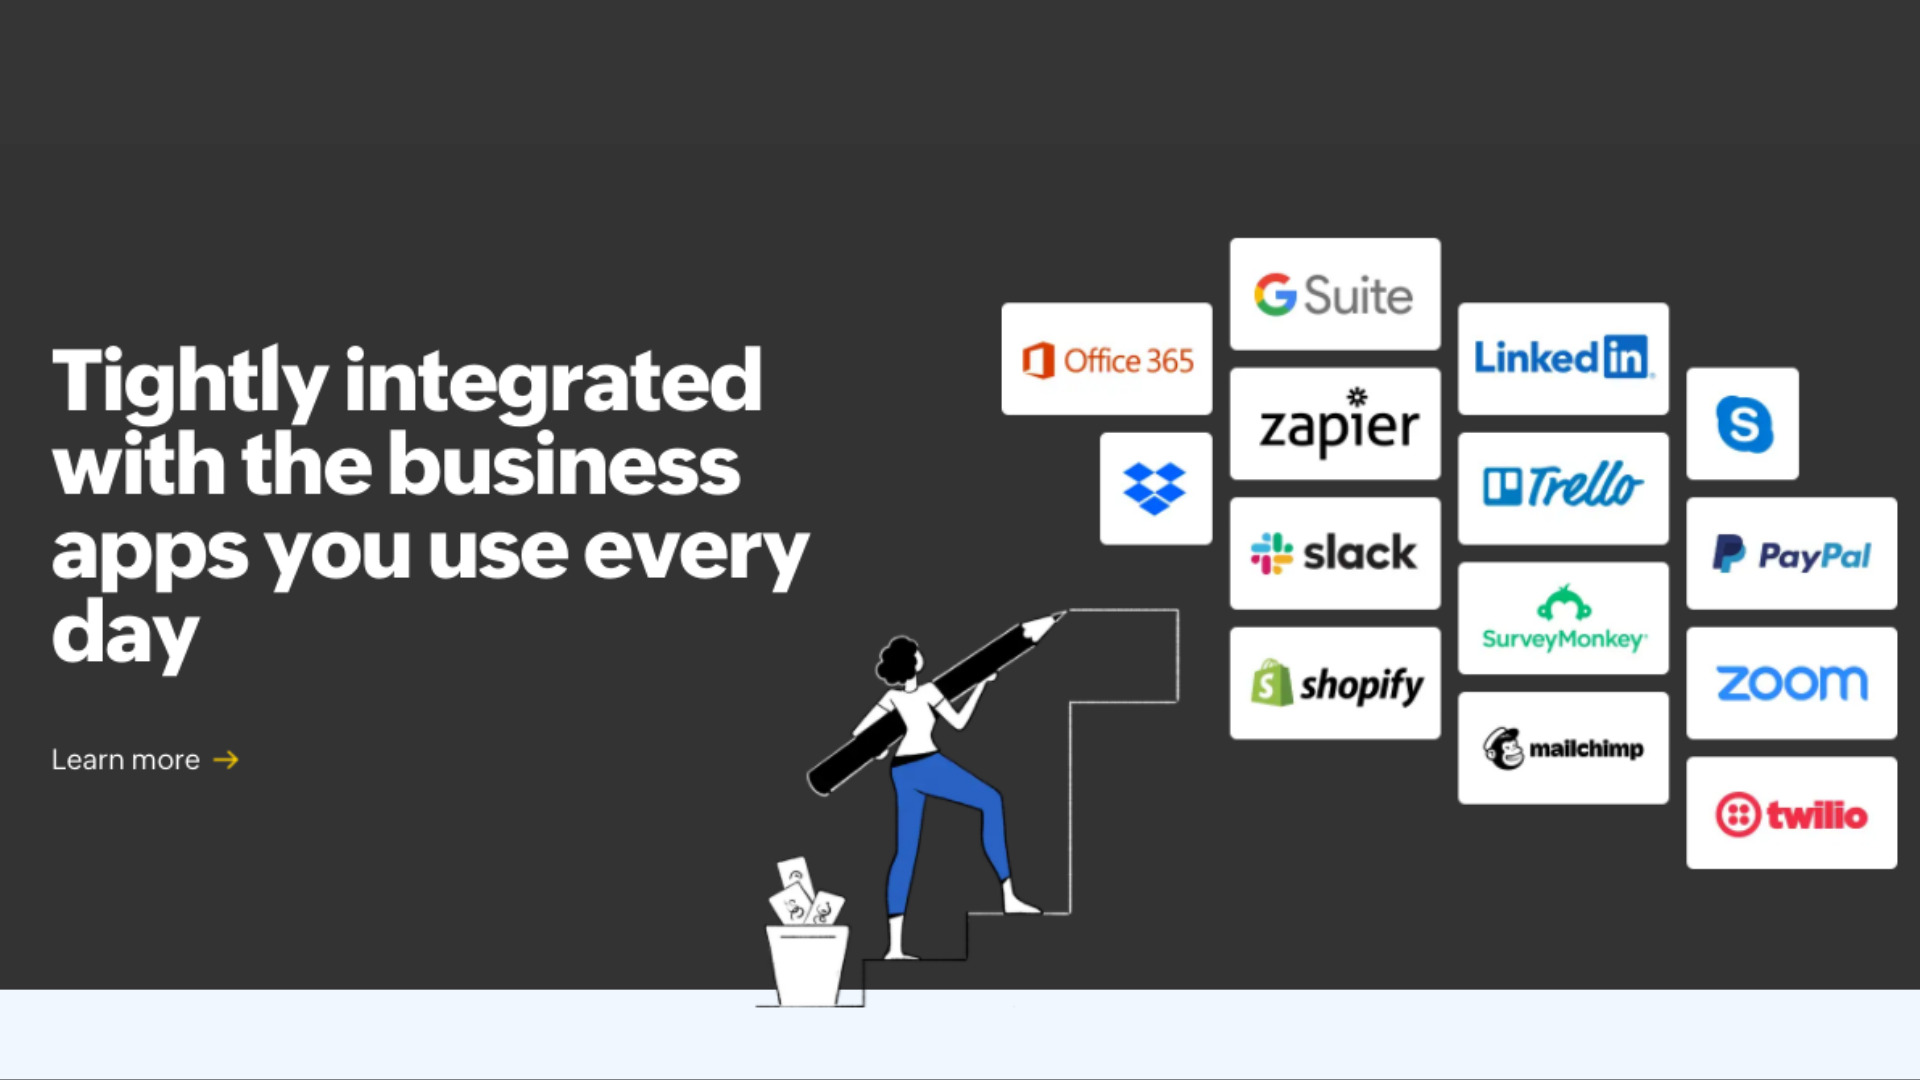 Zoho CRM's webpage discussing third-party integrations